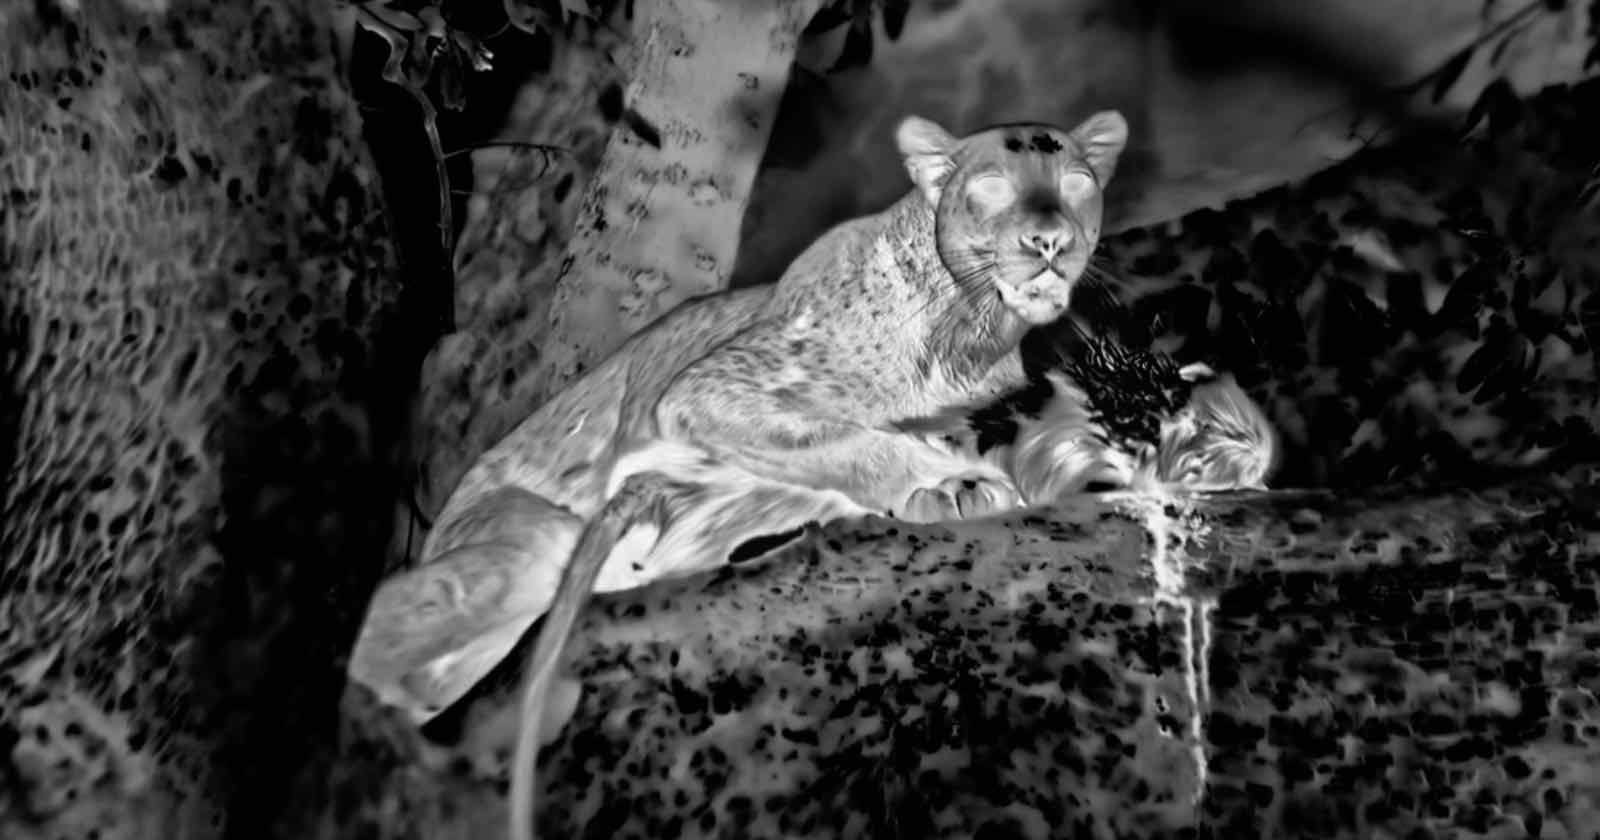  night vision camera films leopard hunting baboons world-first 